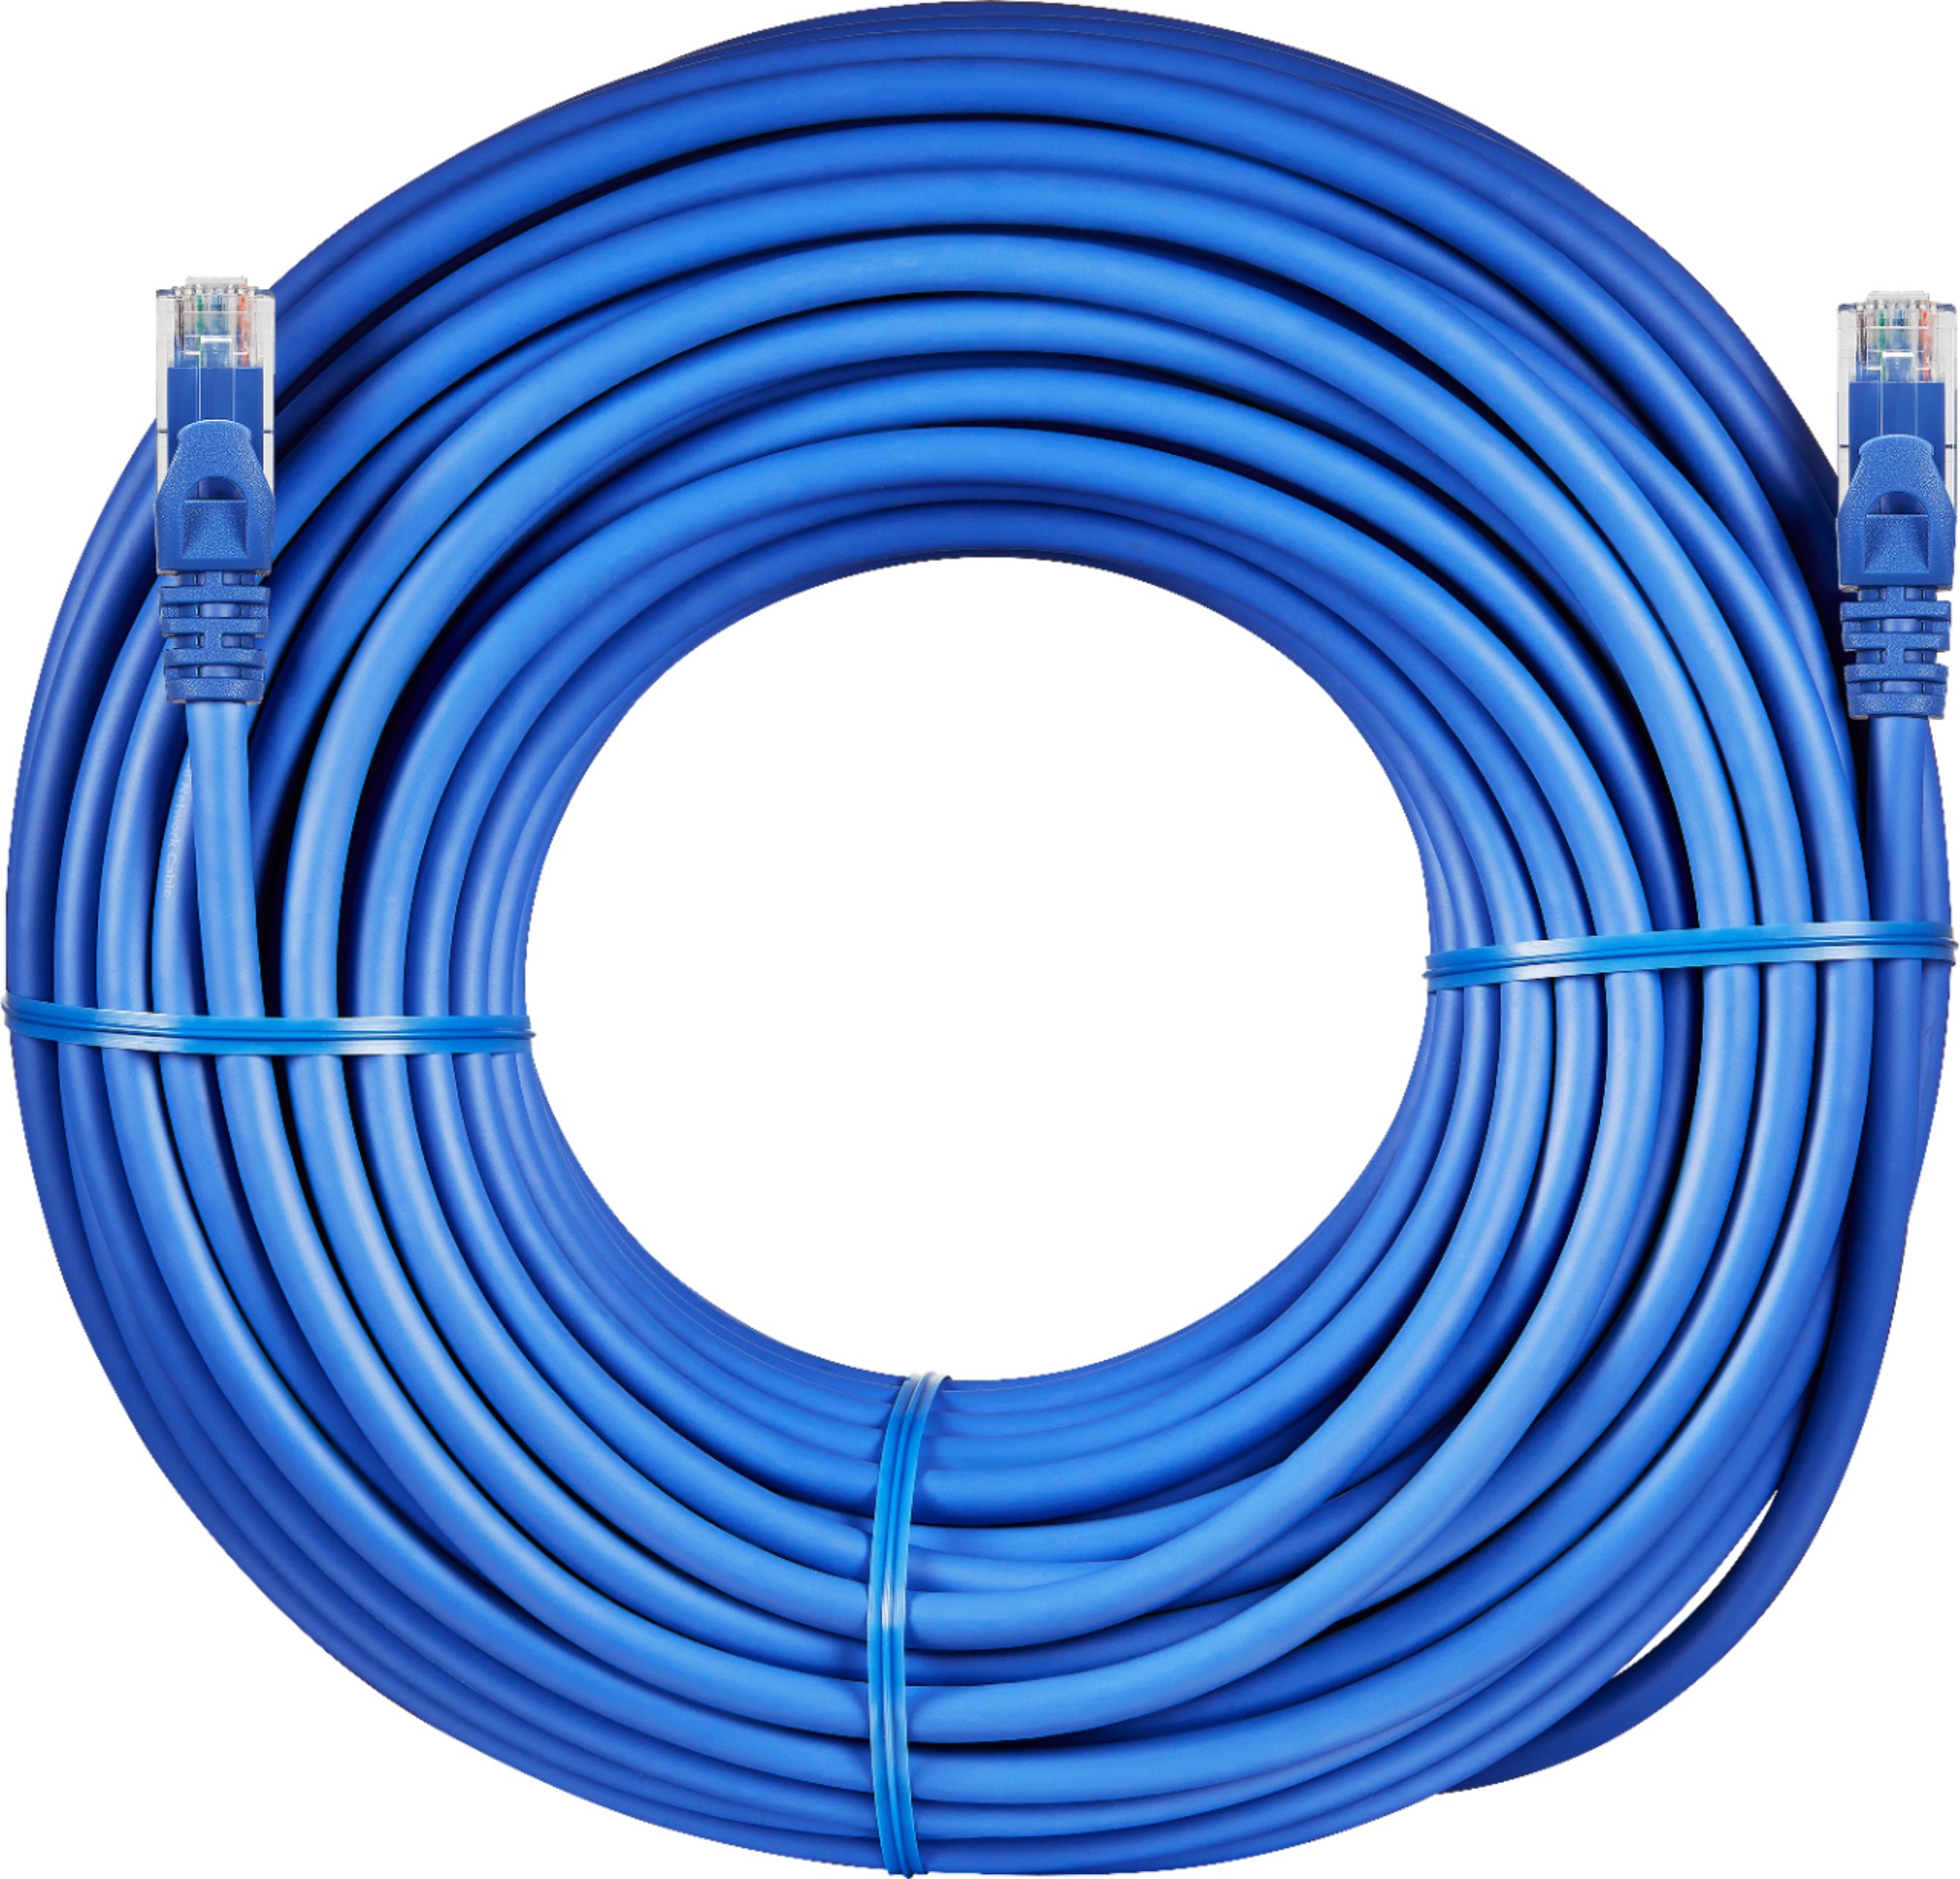 Ultra Clarity Cables Ethernet Cable, Cat6 Ethernet Cable, 100 ft - RJ45,  LAN, UTP CAT 6, Network, Patch, Internet Cable - 100 Feet